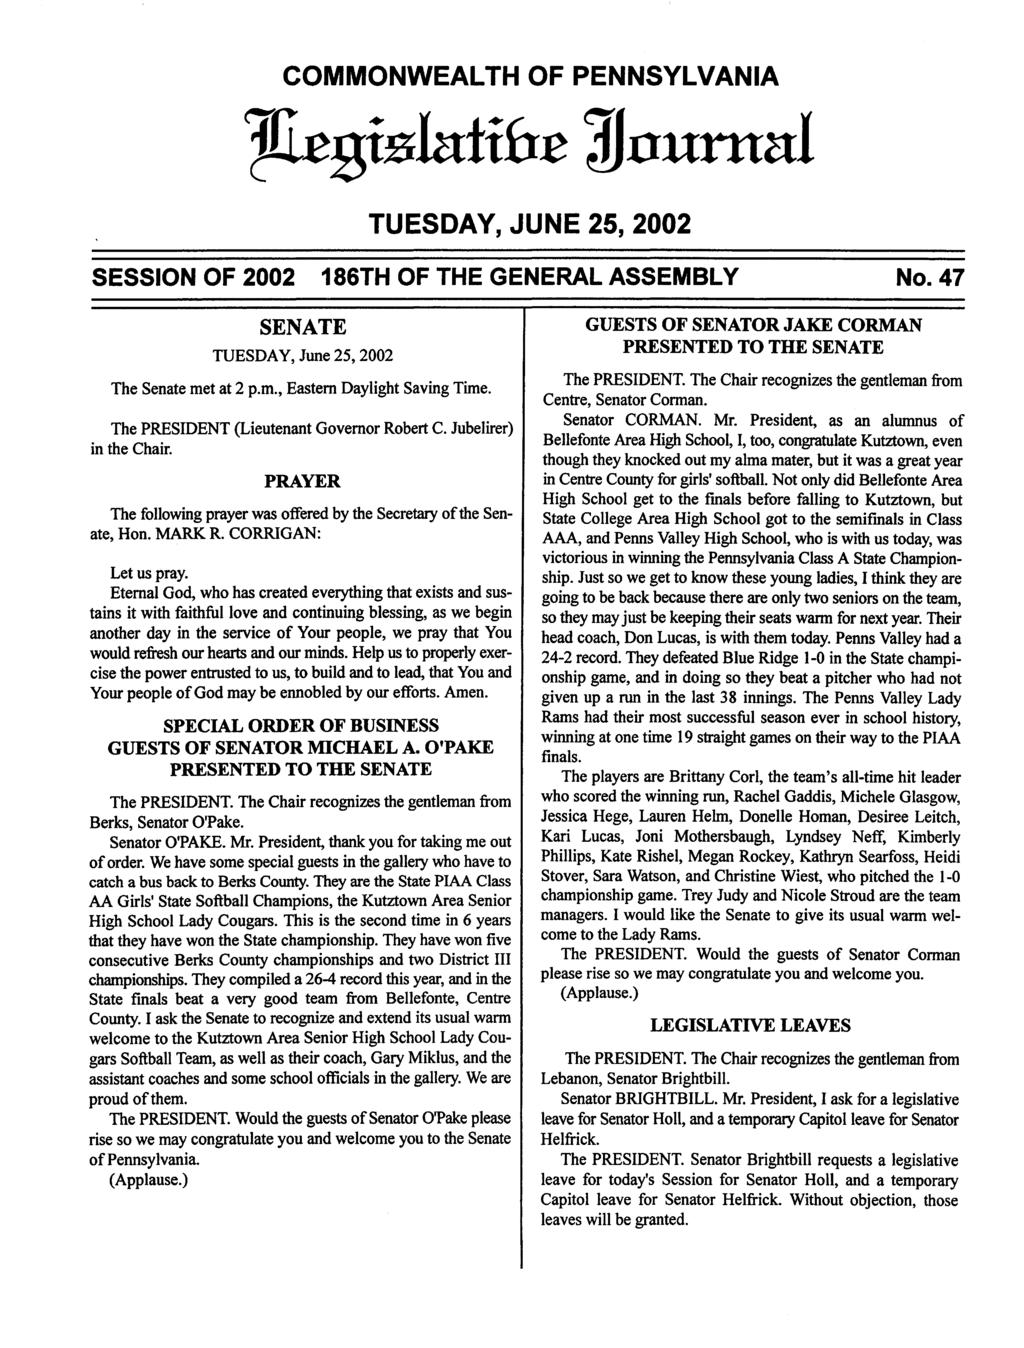 COMMONWEALTH OF PENNSYLVANIA TUESDAY, JUNE 25, 2002 SESSION OF 2002 186TH OF THE GENERAL ASSEMBLY No. 47 SENATE TUESDAY, June 25,2002 The Senate met at 2 p.m.. Eastern Daylight Saving Time.